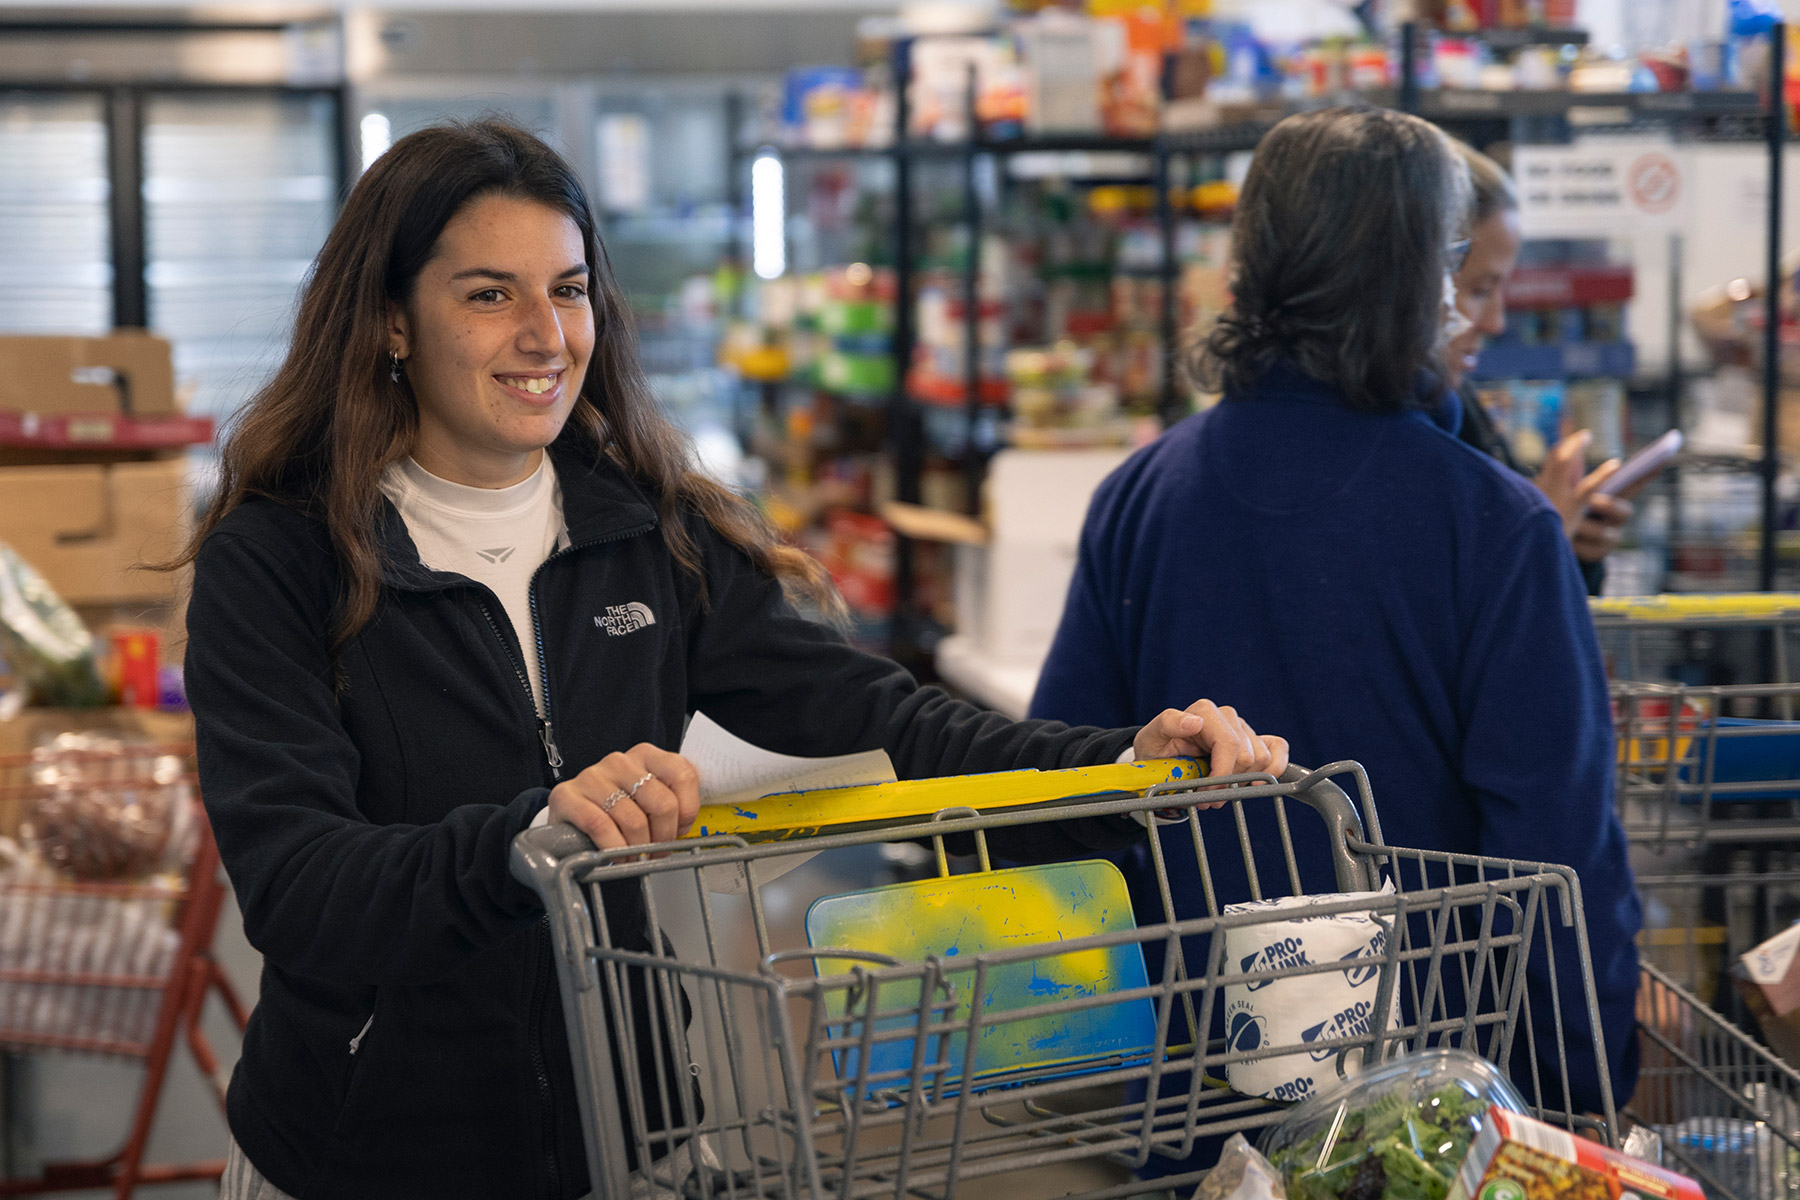 Student smiles while pushing a shopping cart of food inside a pantry